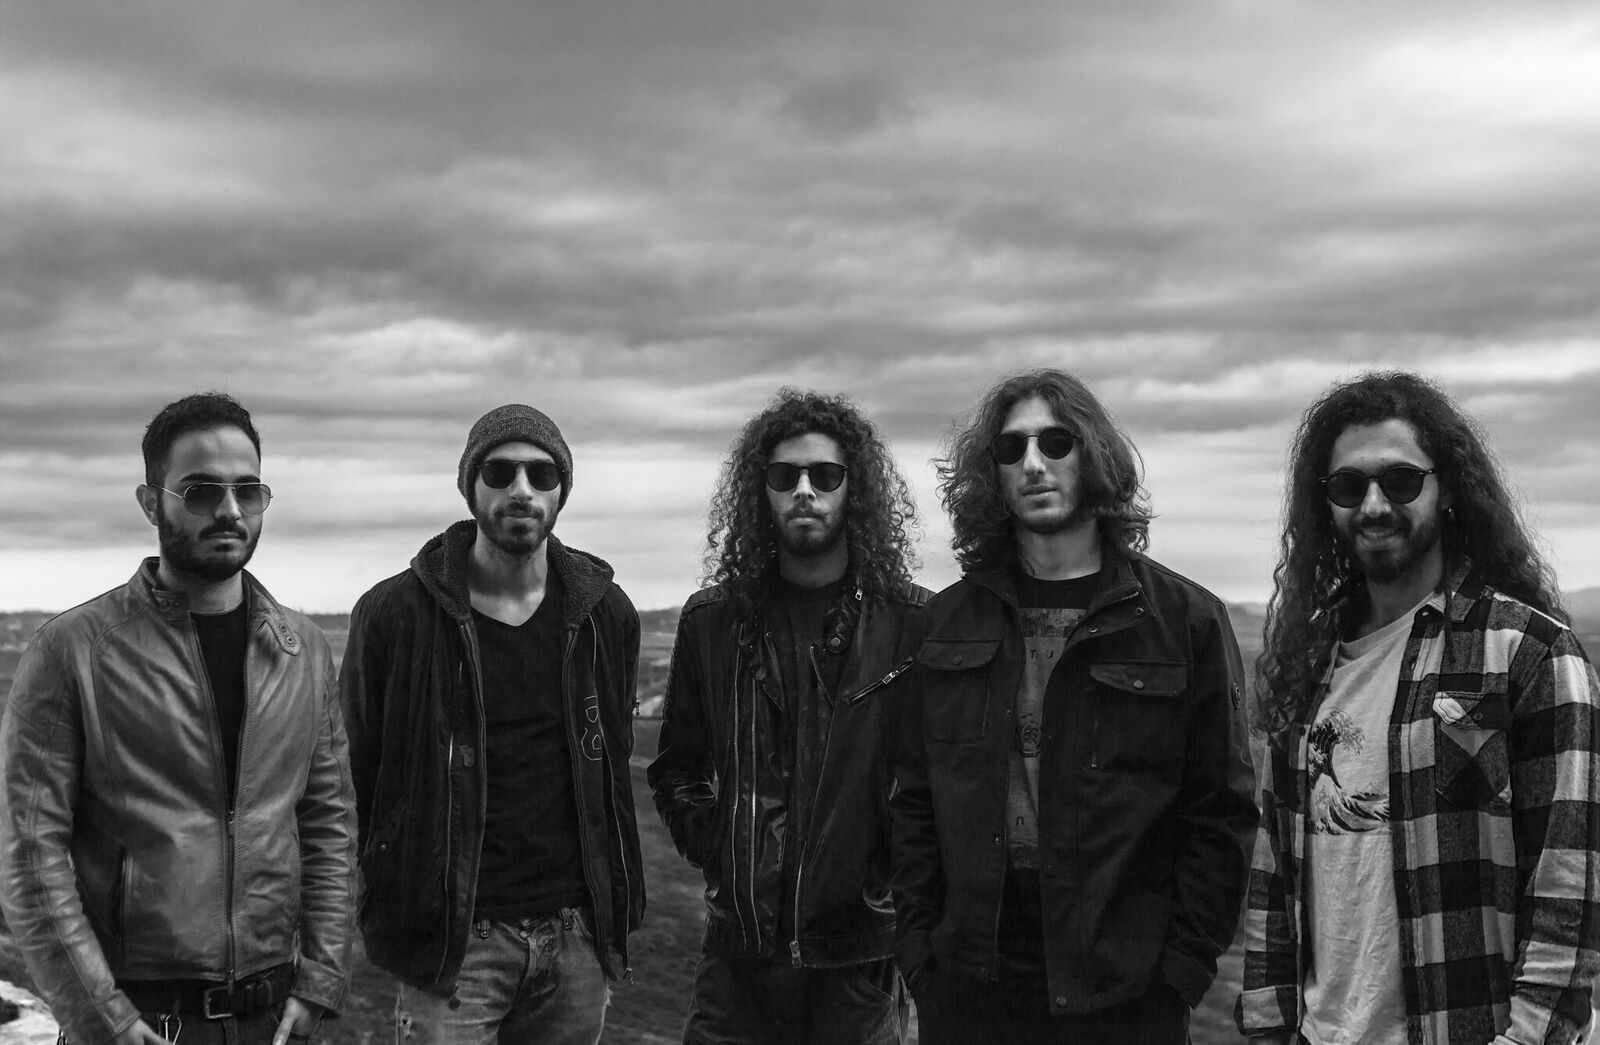 The Cypriot Heavy Rockers Stonus are releasing a new album